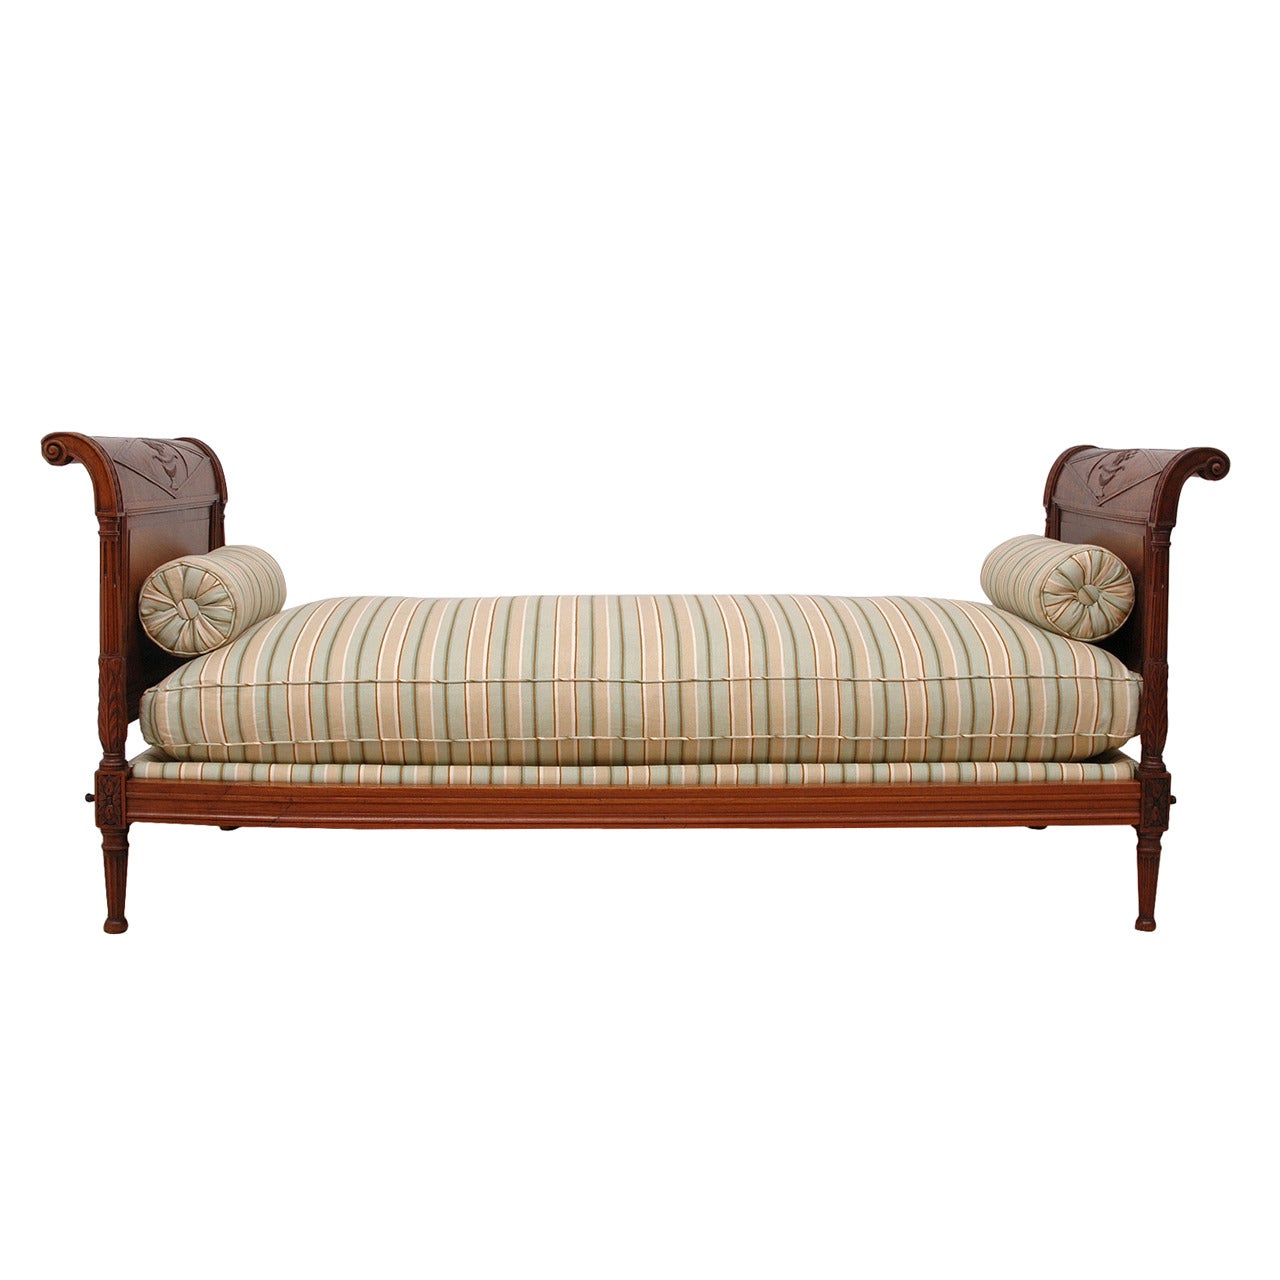 Directoire Daybed in Walnut, France, circa 1800